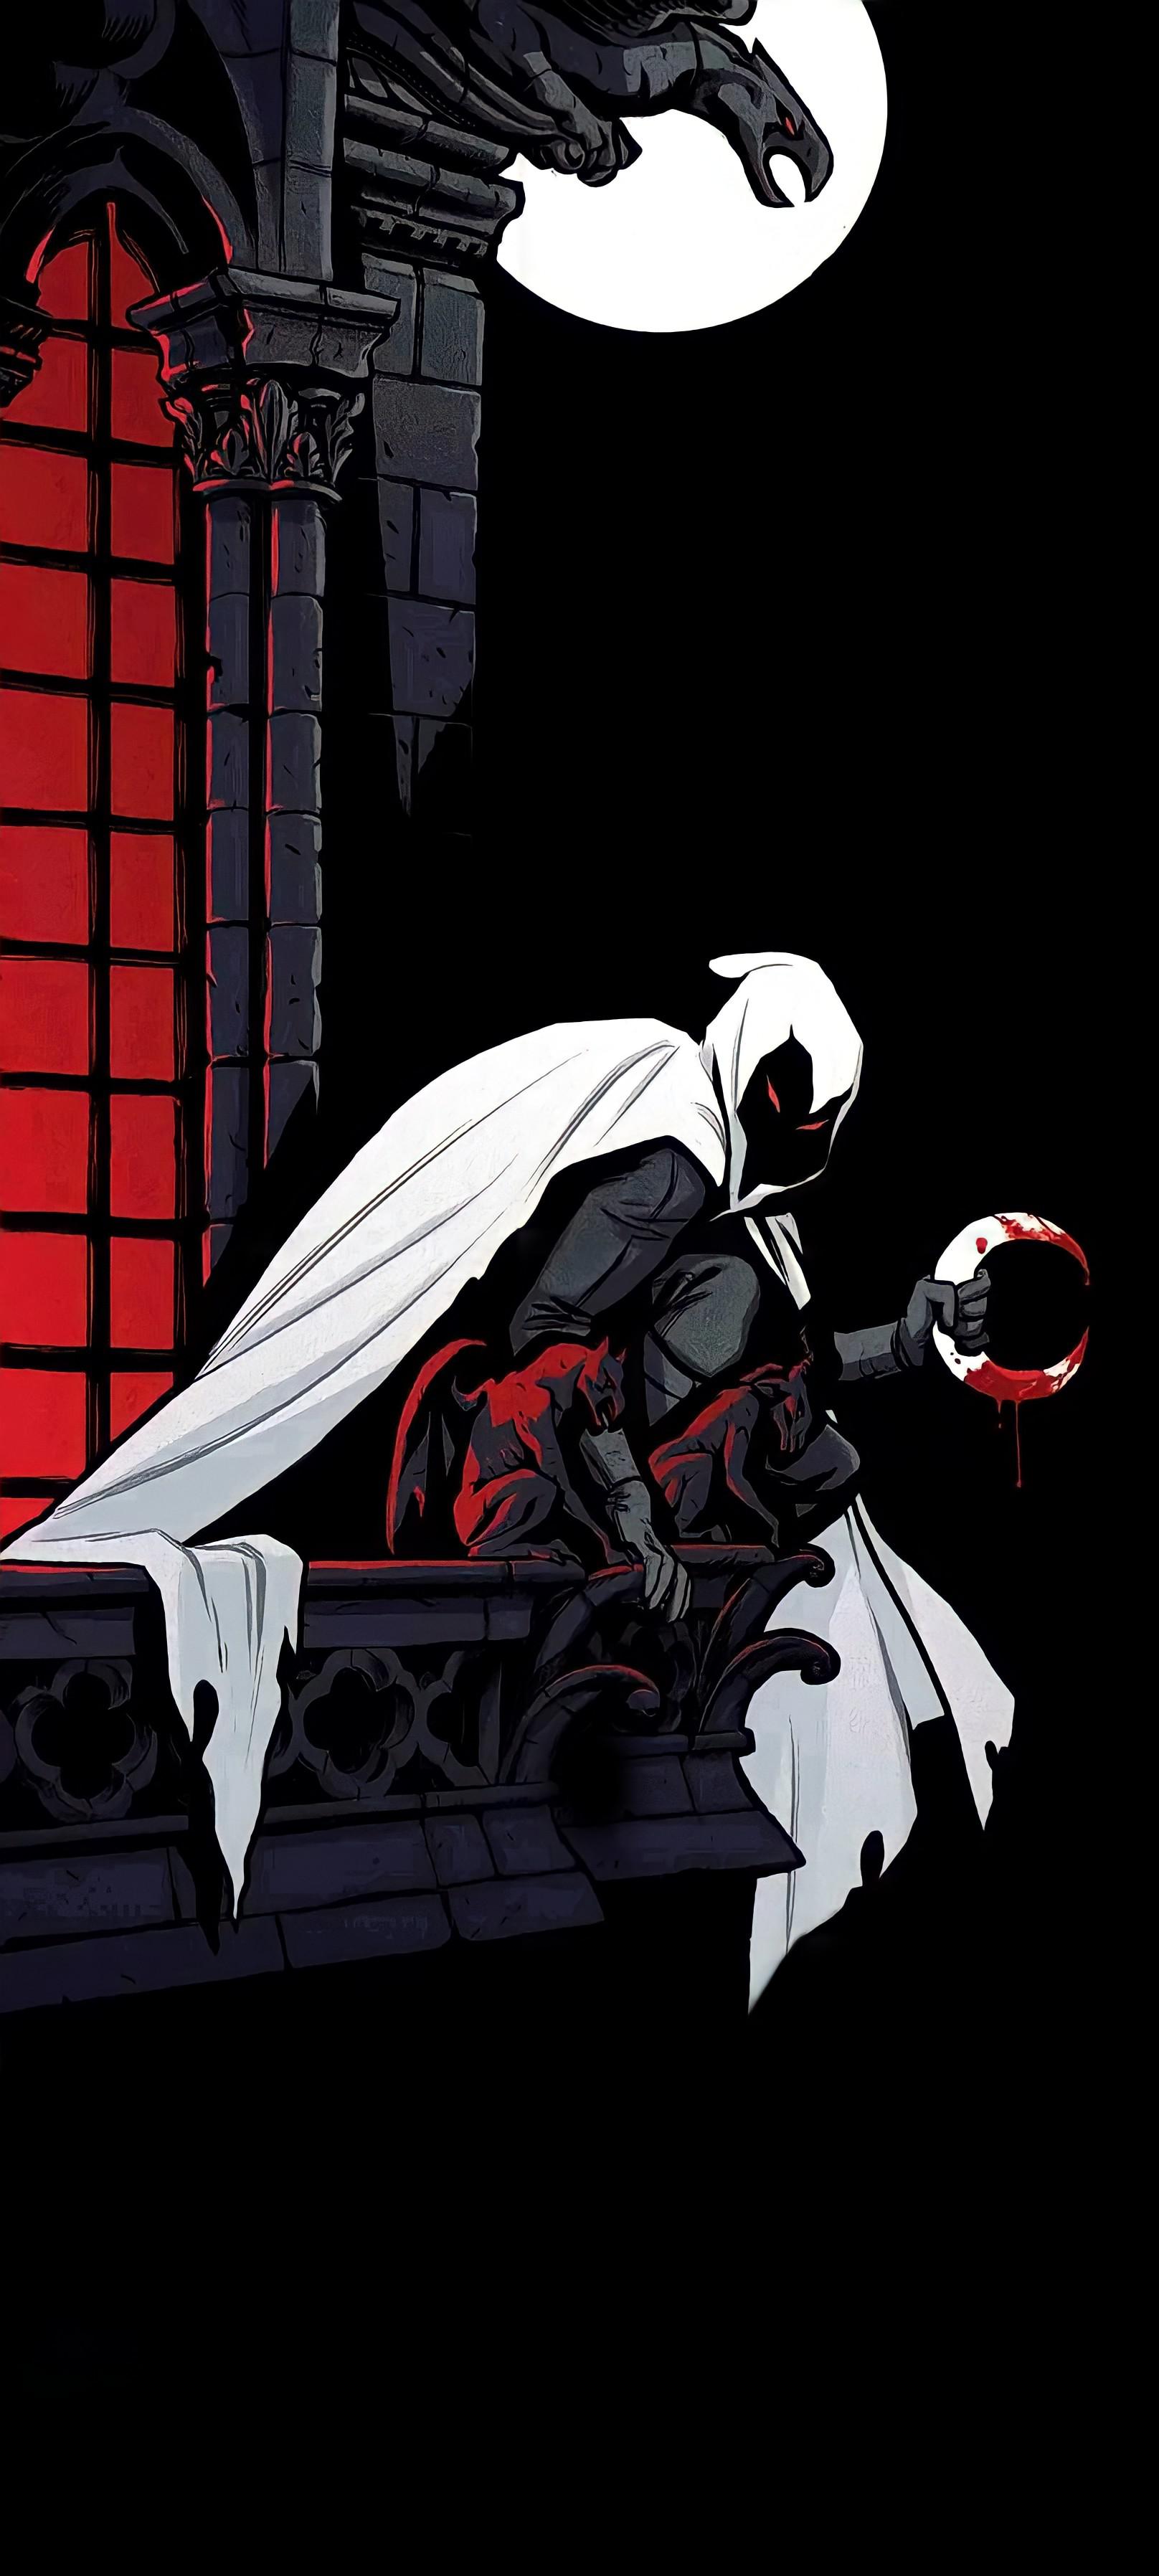 People seemed to like the first one, so, more Moon Knight Wallpaper